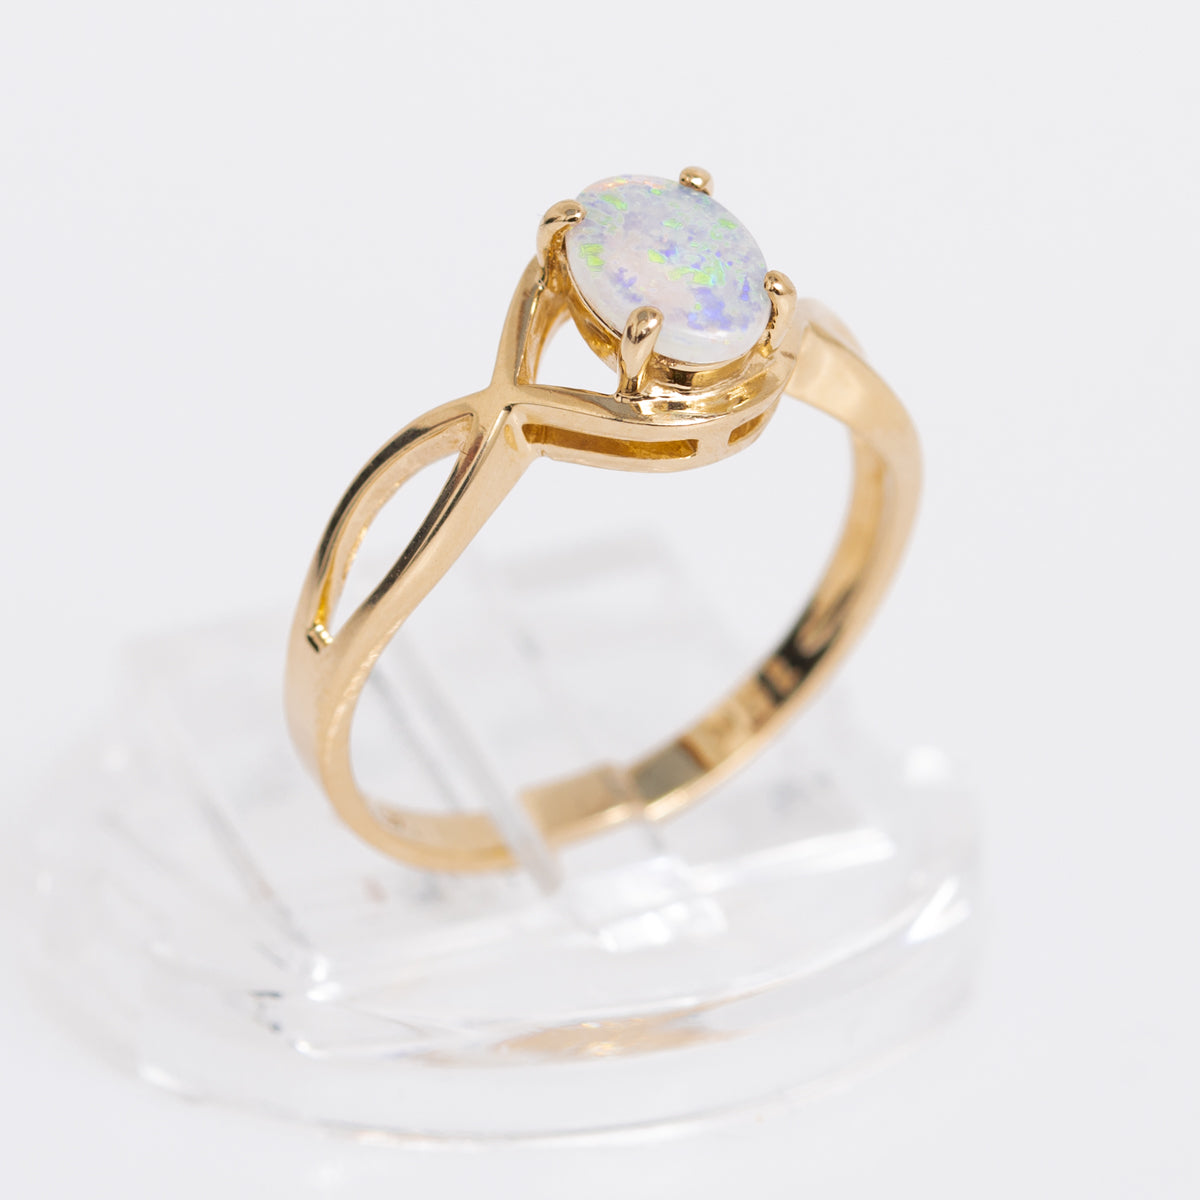 Elegant Ladies 10K Gold & White Opal Ring With Decorative Band Size M1/2 (A1139)